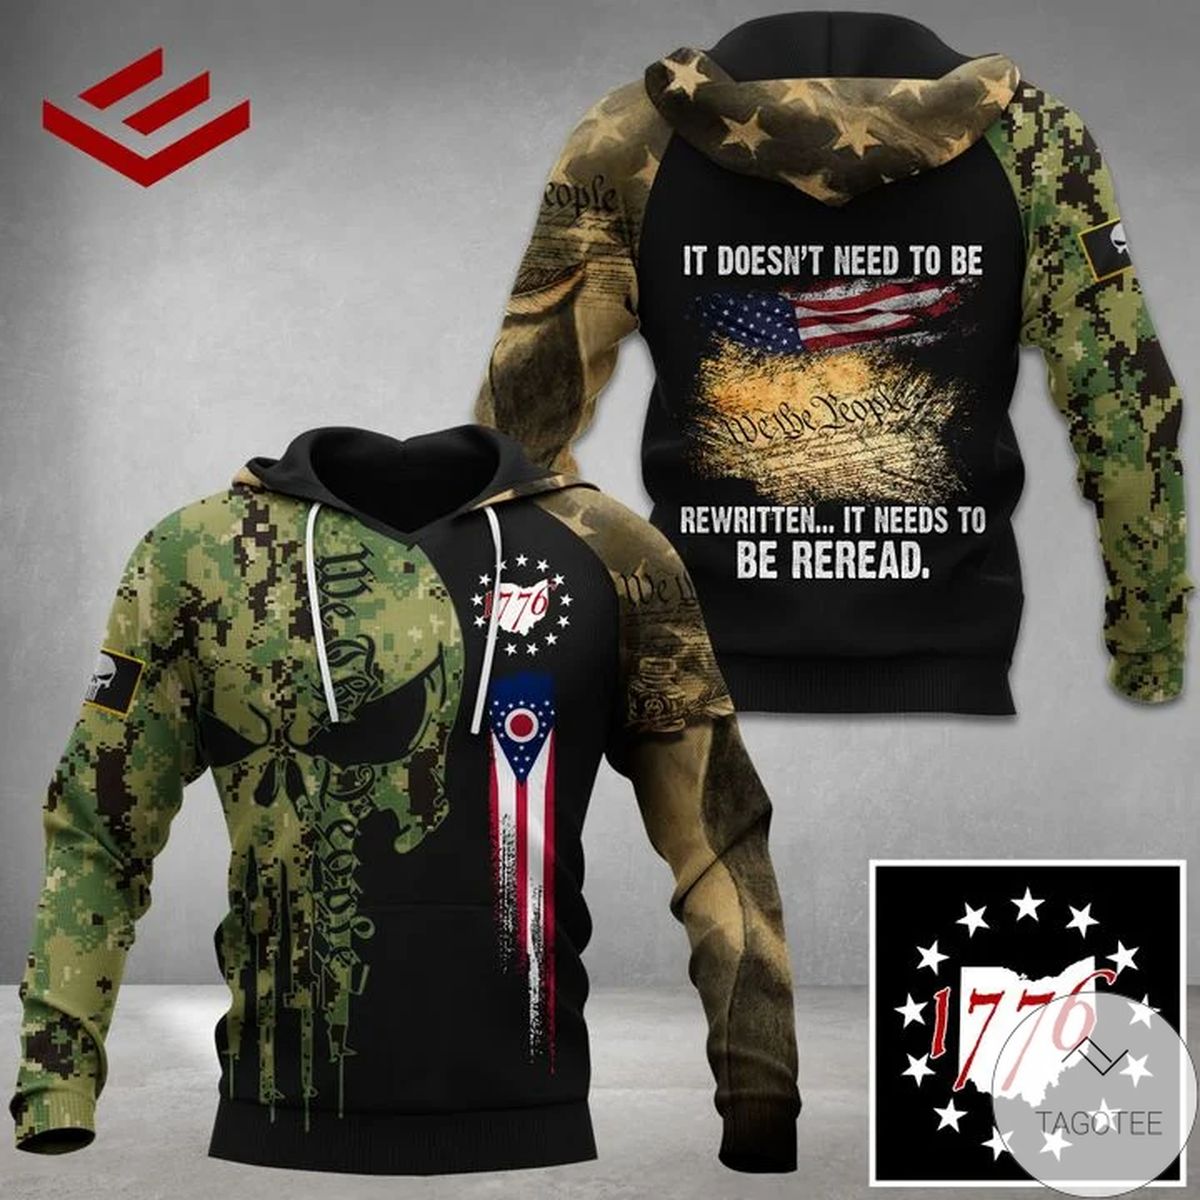 Ohio Patriots 1776 It Doesn't Need To Be Rewritten It Needs To Be Reread Hoodie